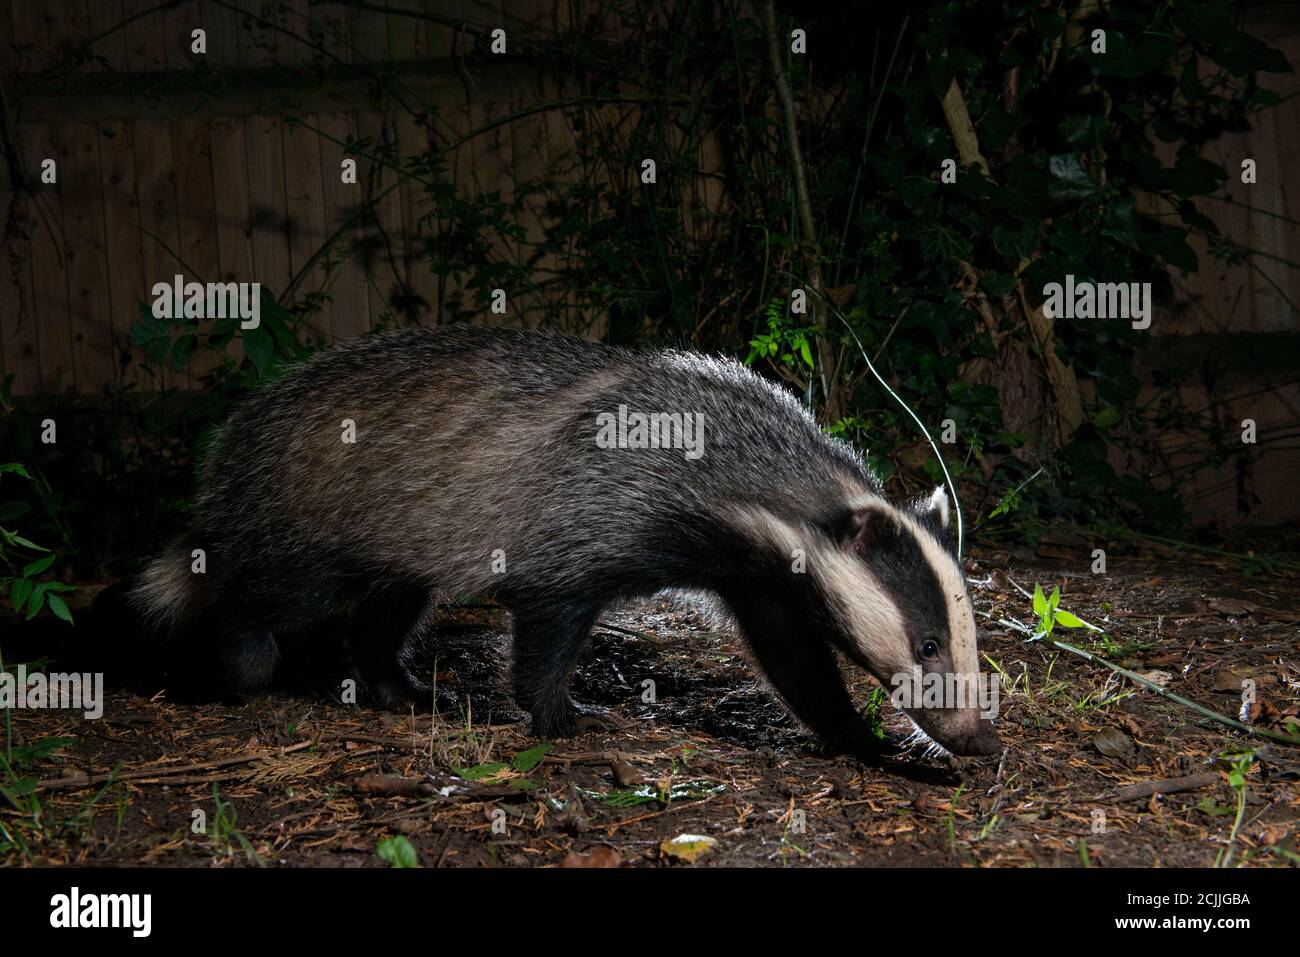 Badger at night foraging in a garden Stock Photo